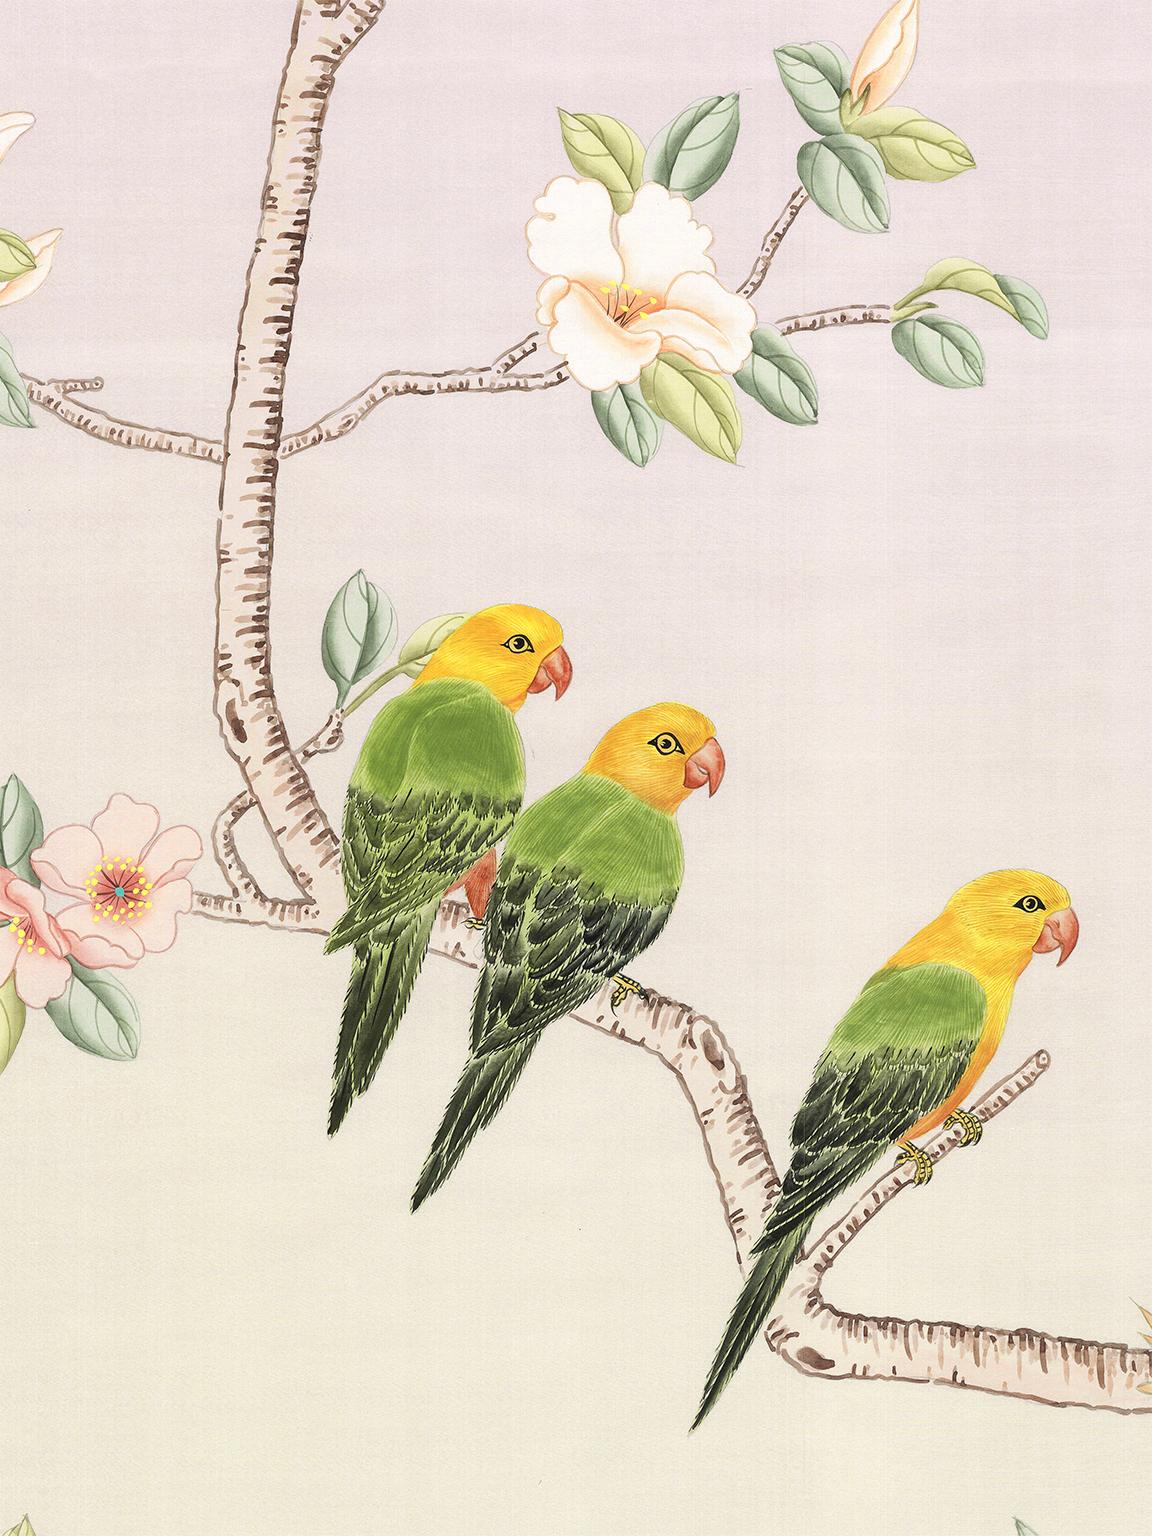 This mural set, called Enchanted Garden, is hand painted on a pearlized silk paper called “Cai Hong.” The color of the silk varies as you change your view. This enchanting chinoiserie combines flowering trees and tropical palms. Every panel has one